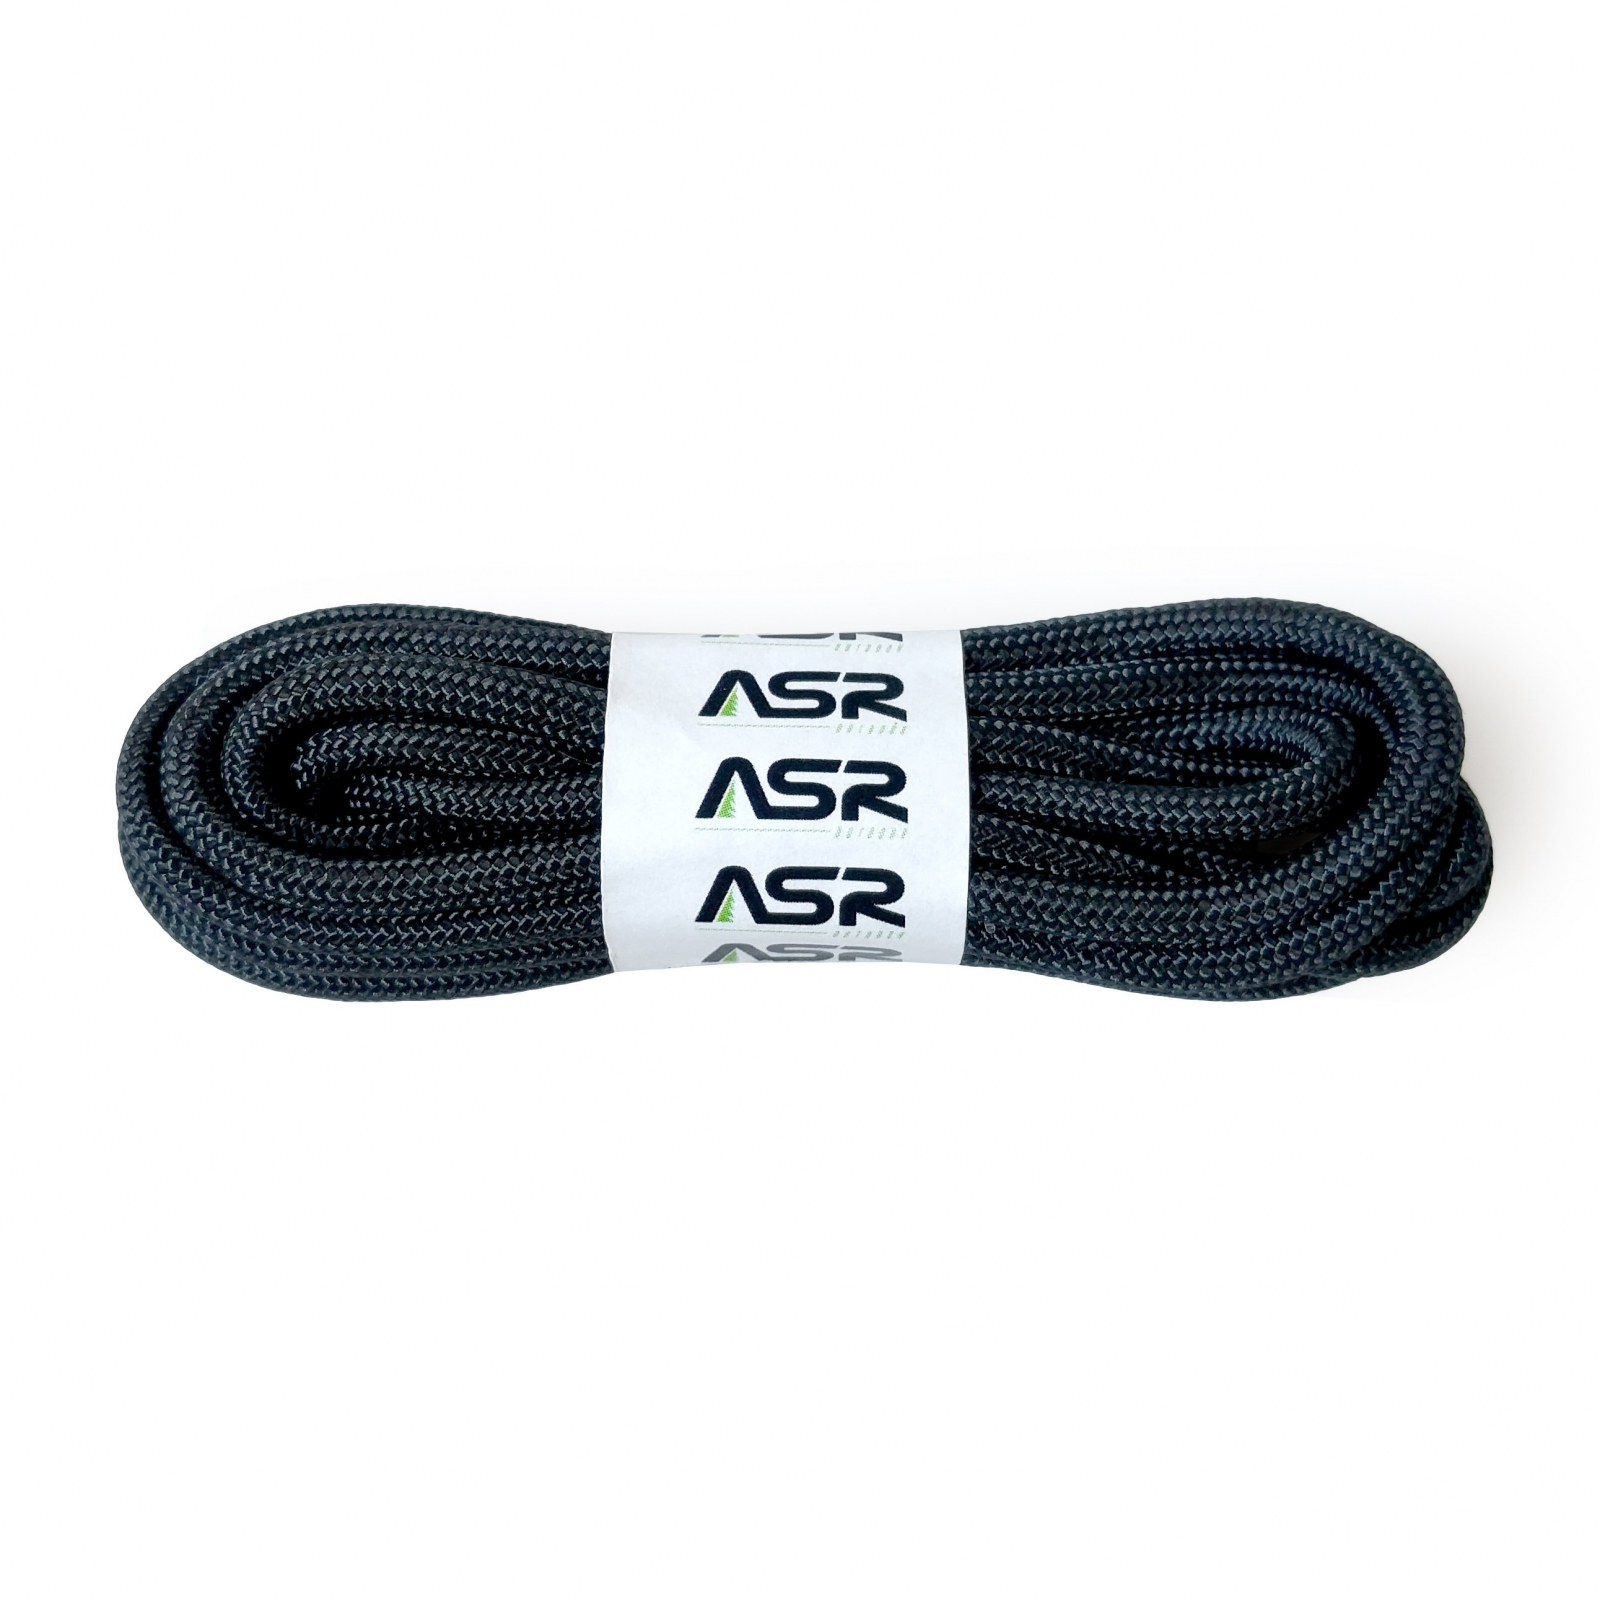 500ft Black Paracord Rope for Survival